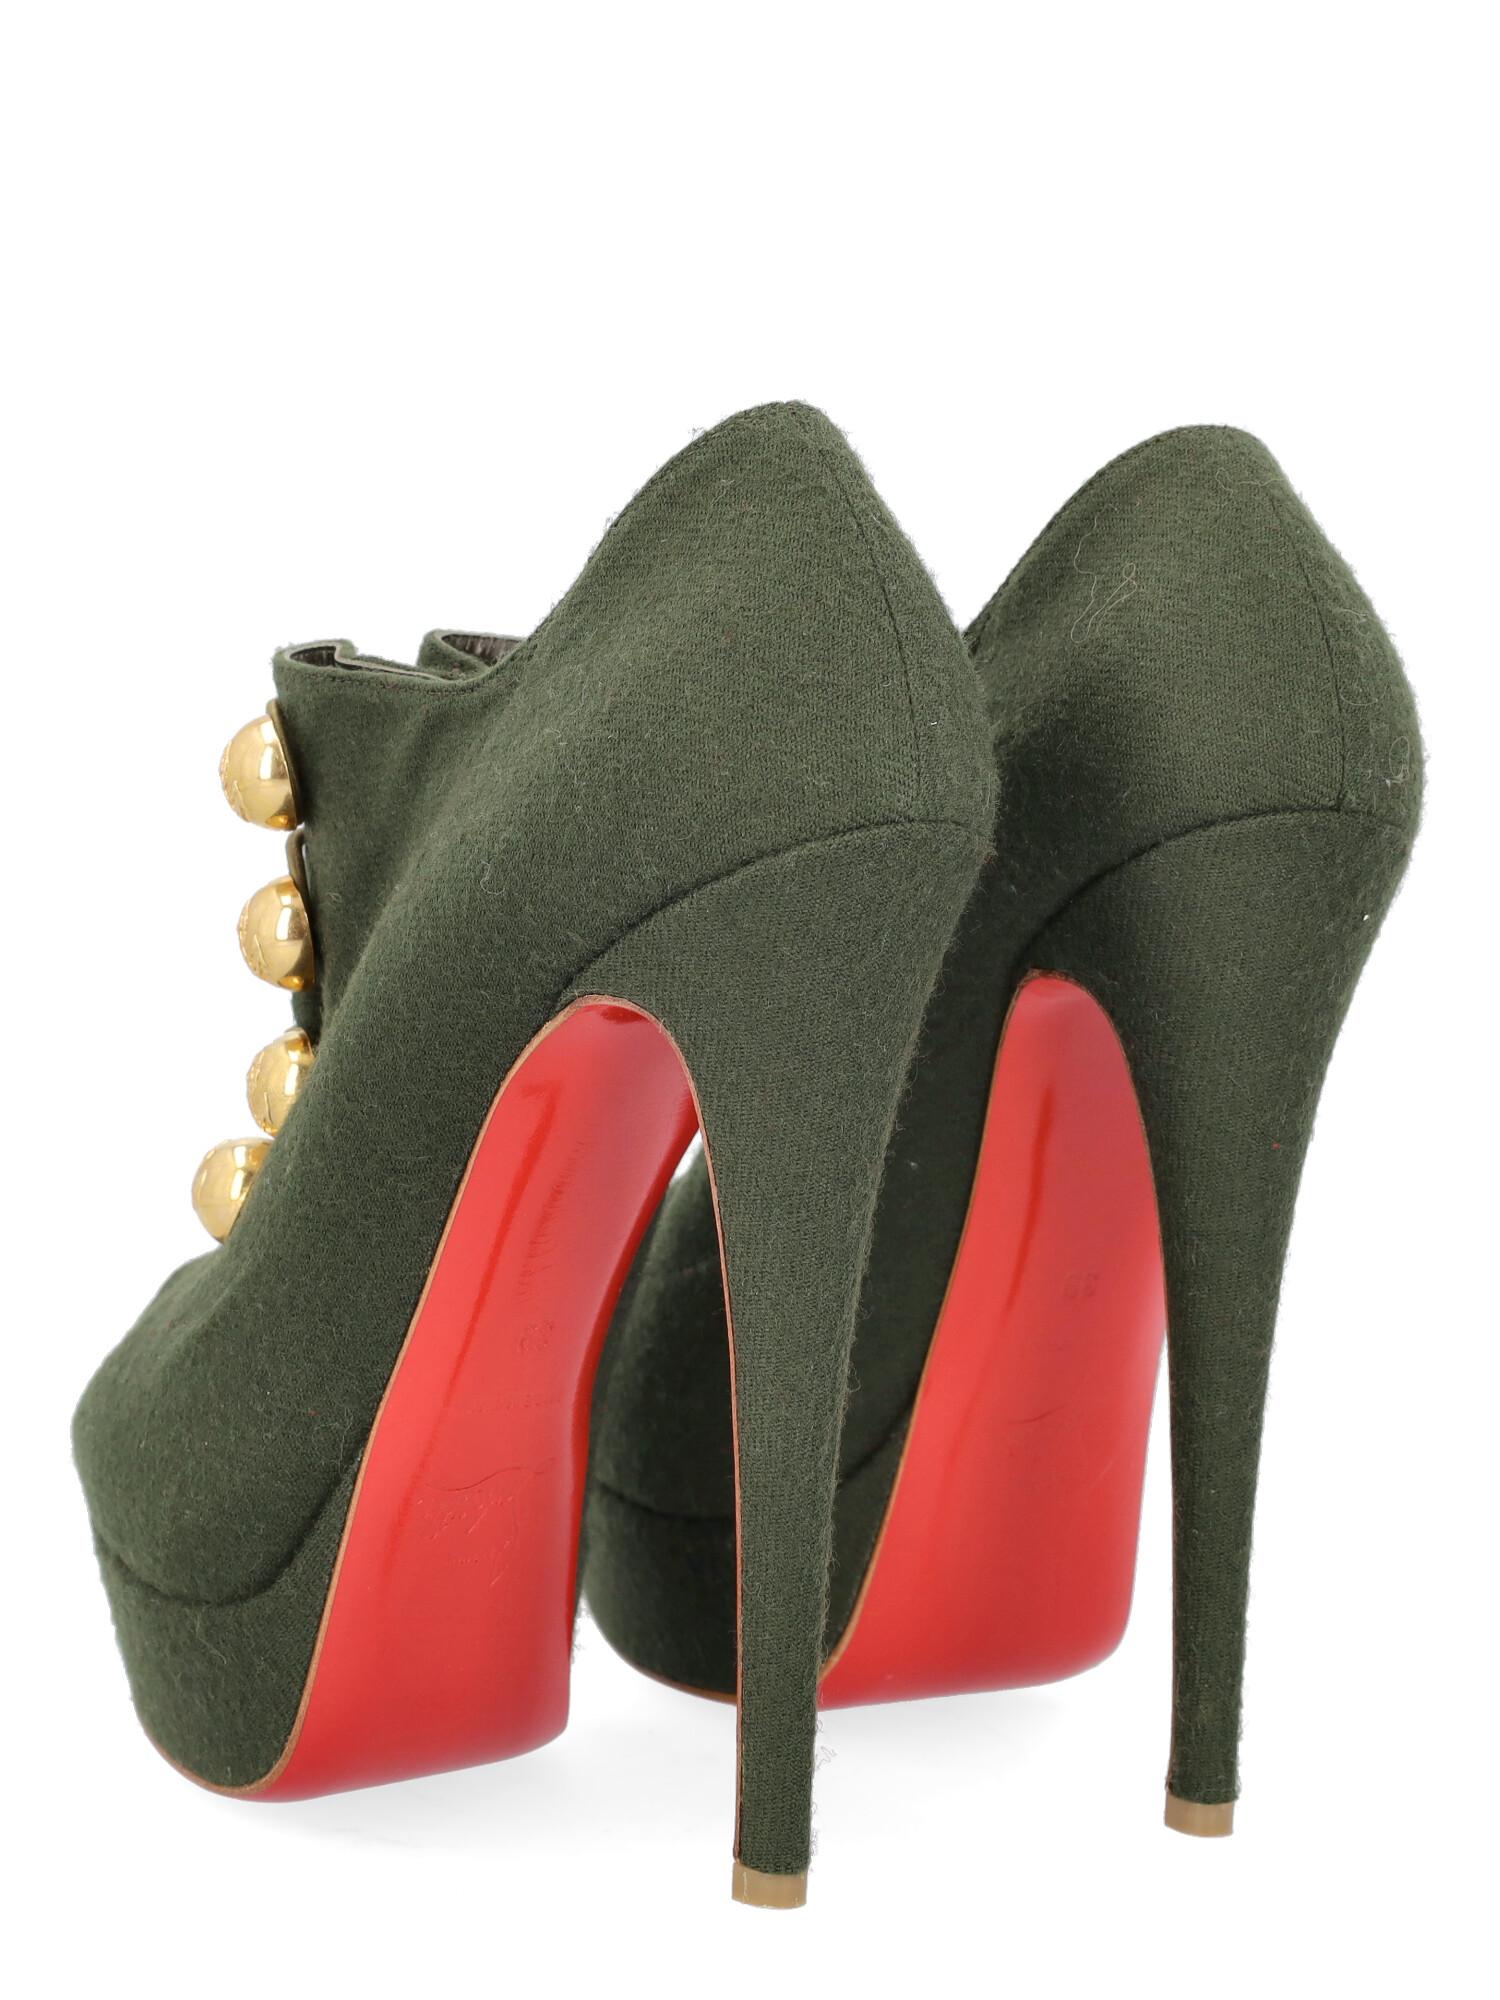 louboutin green boots